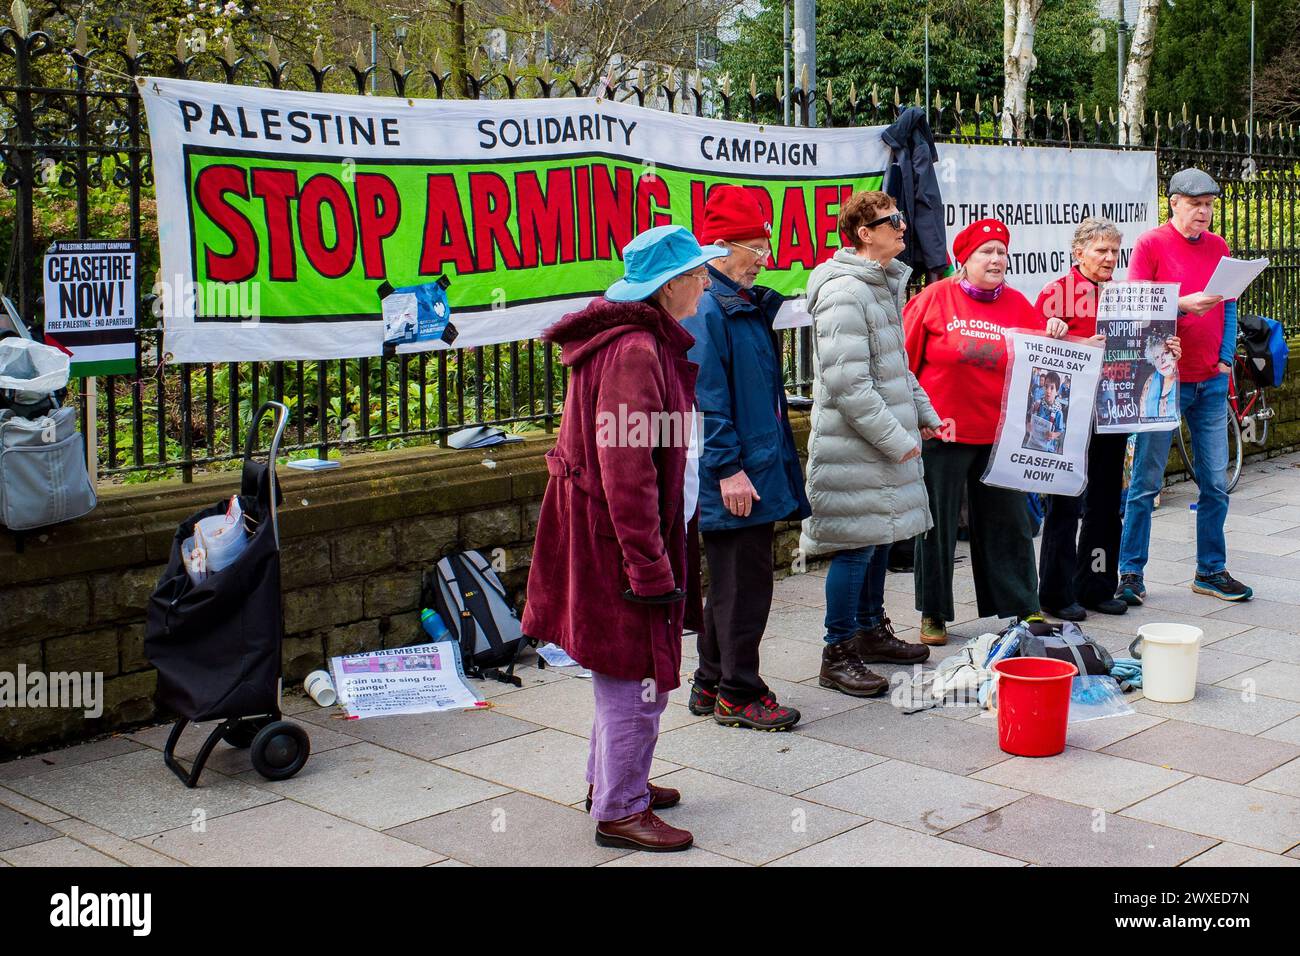 Participants in a peace street demonstration - Palestine Solidarity Campaign. Cardiff City Centre. Easter.  Stop arming Israel. Stock Photo